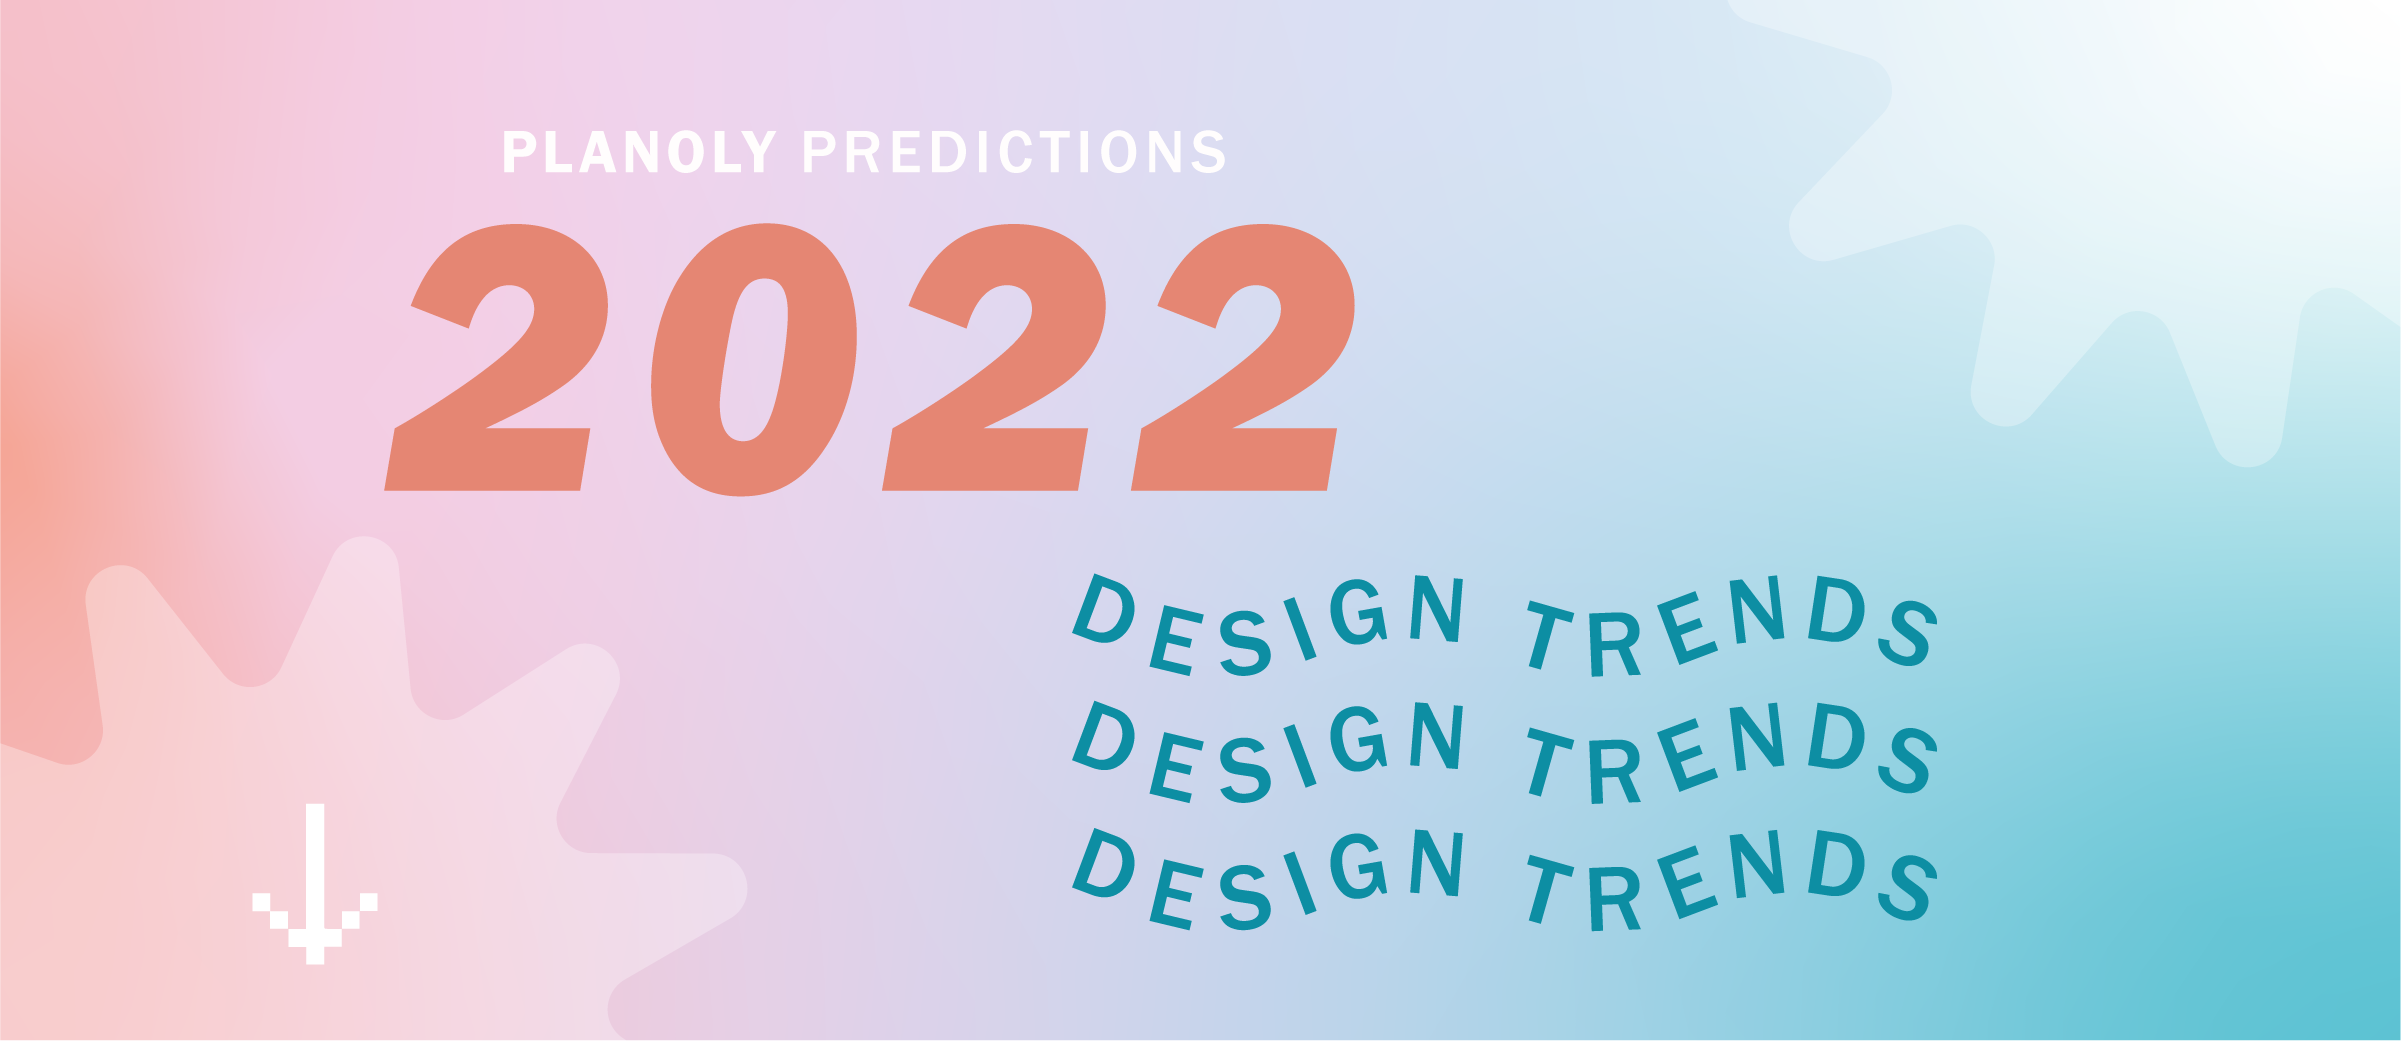 Top Graphic Design Trends to Look out For in 2022